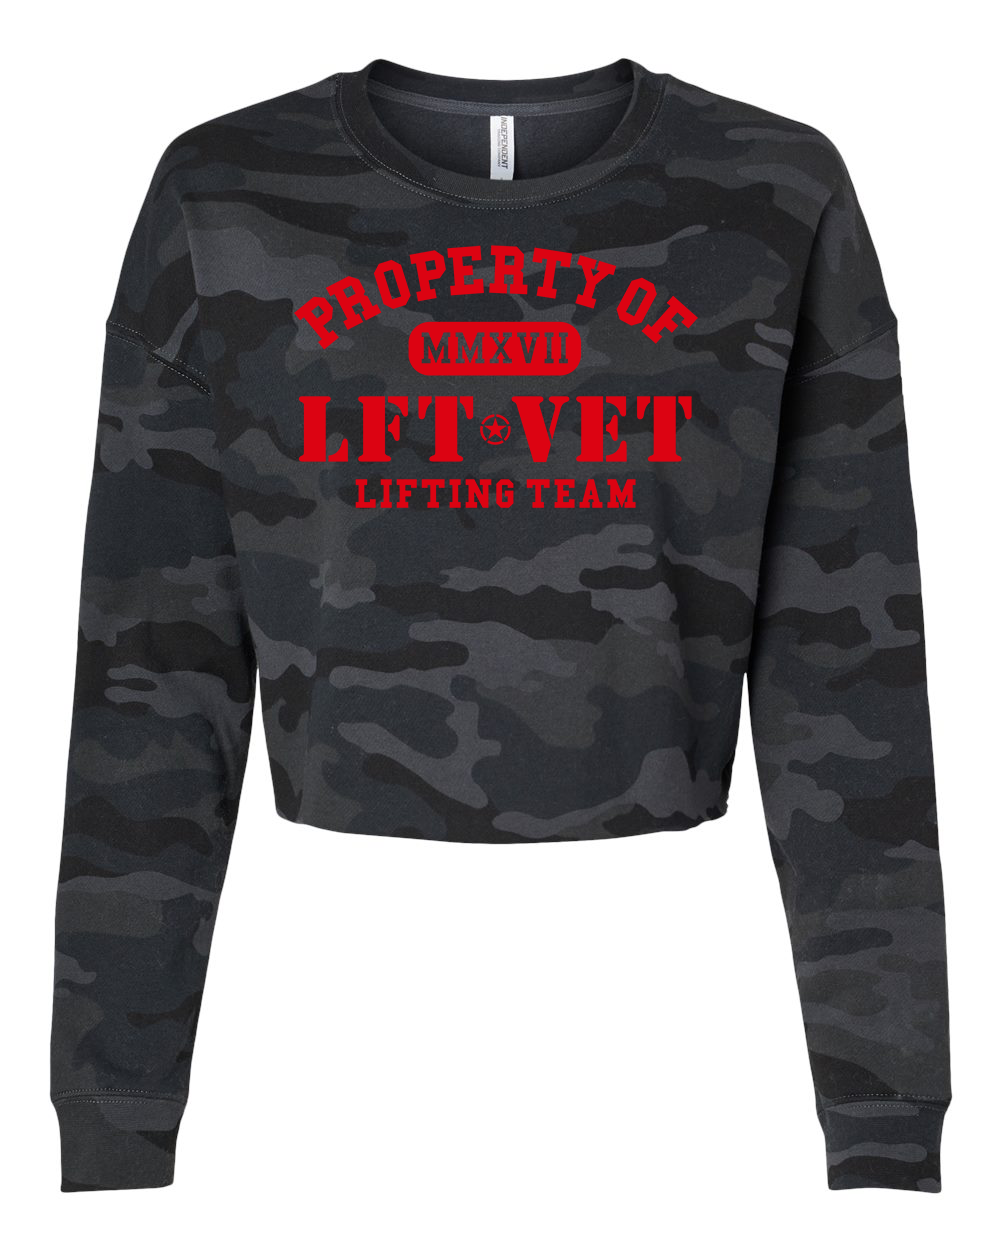 Property of LFTVET Cropped Crew Pullover